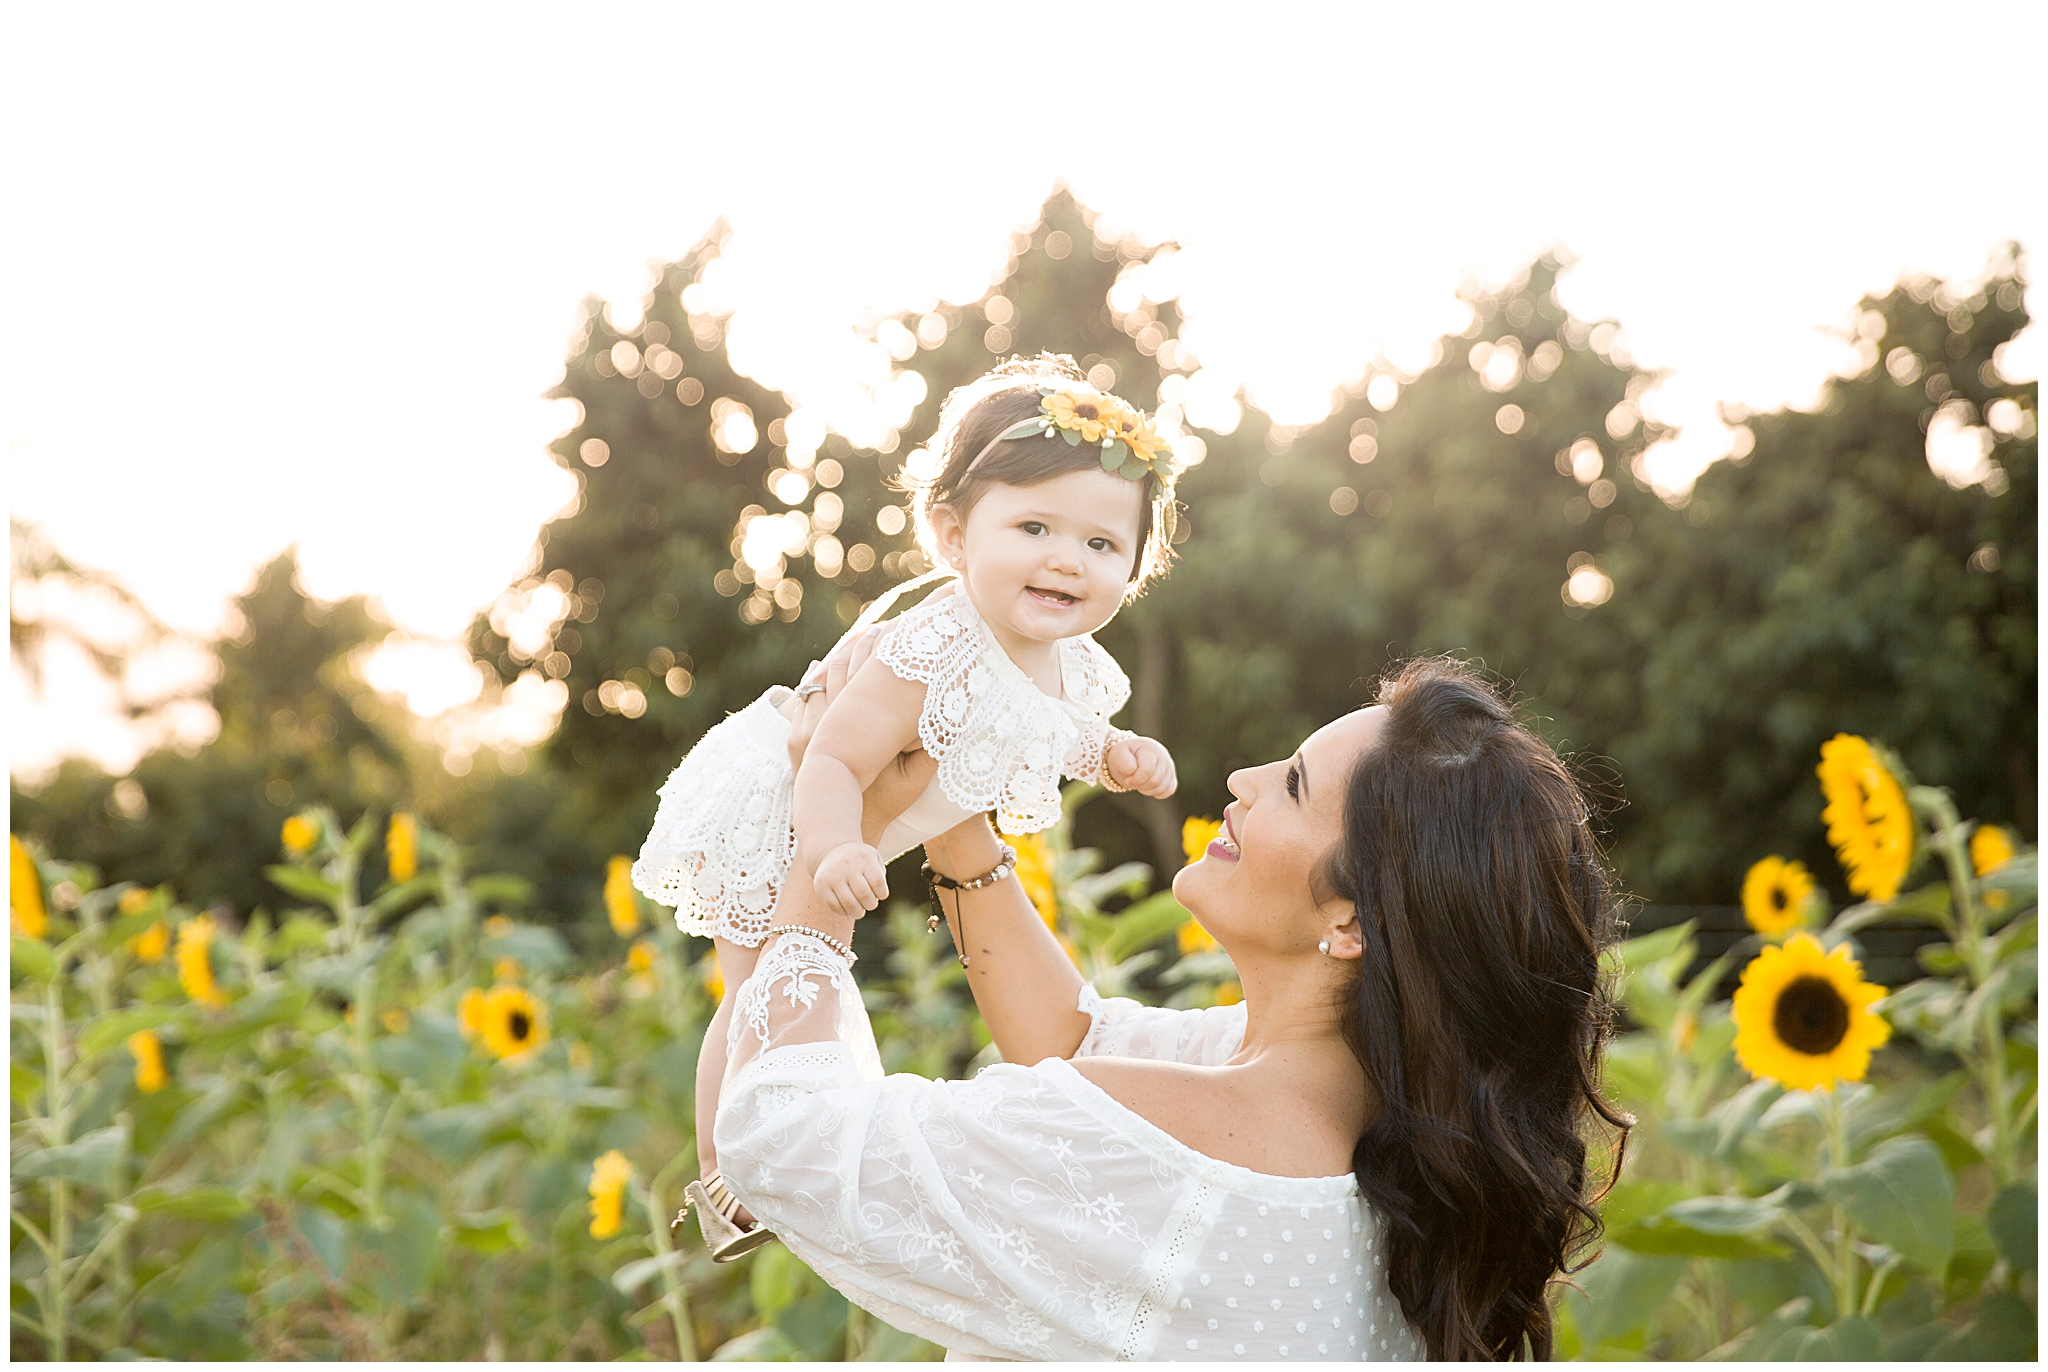 Miami Family Photography | Sunflower field in Homestead FL